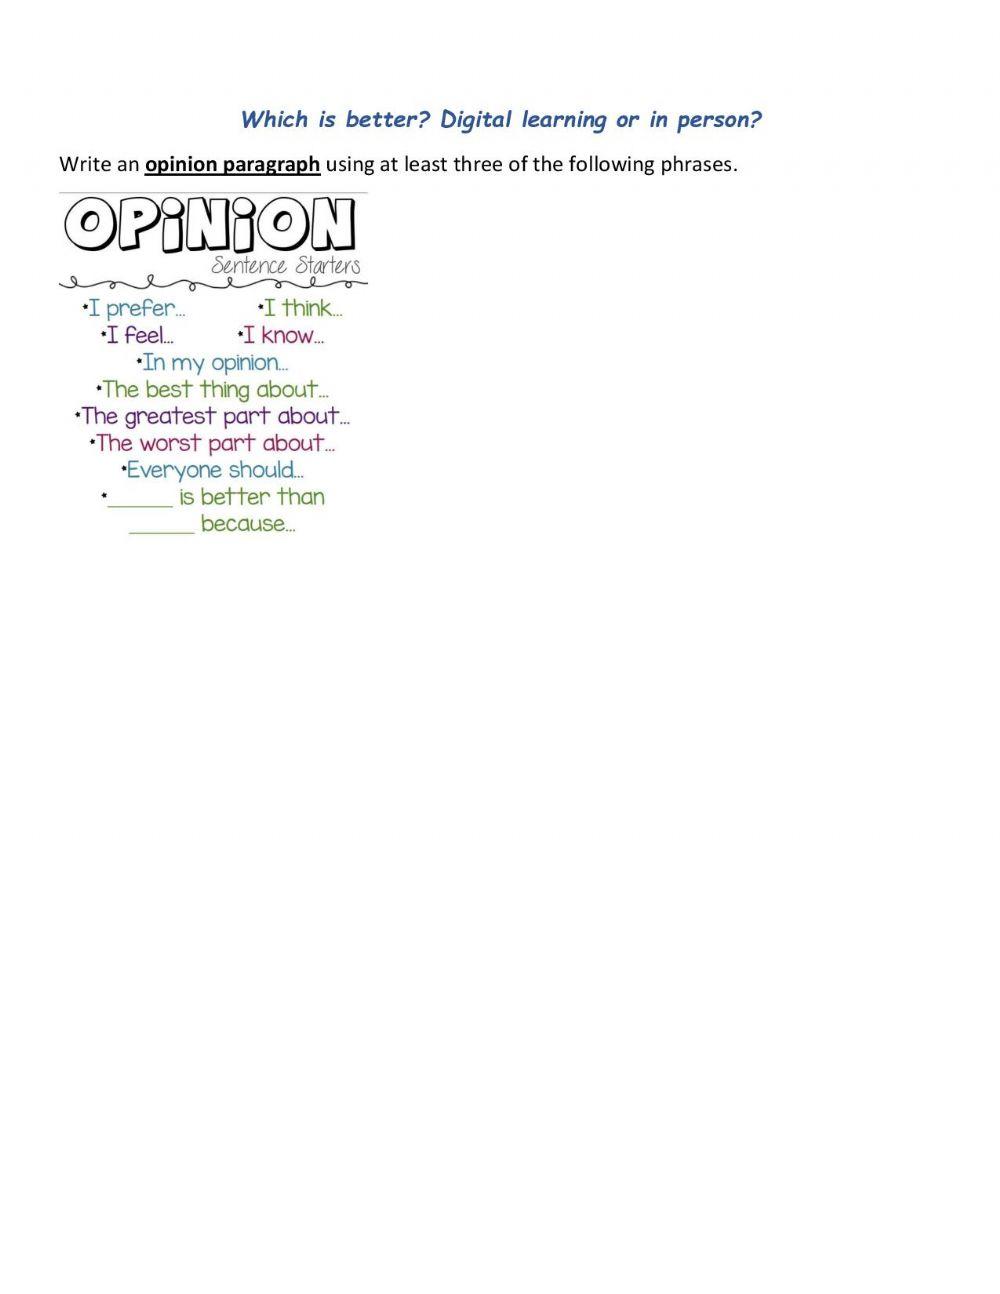 Opinion Writing: Digital or Online Learning?